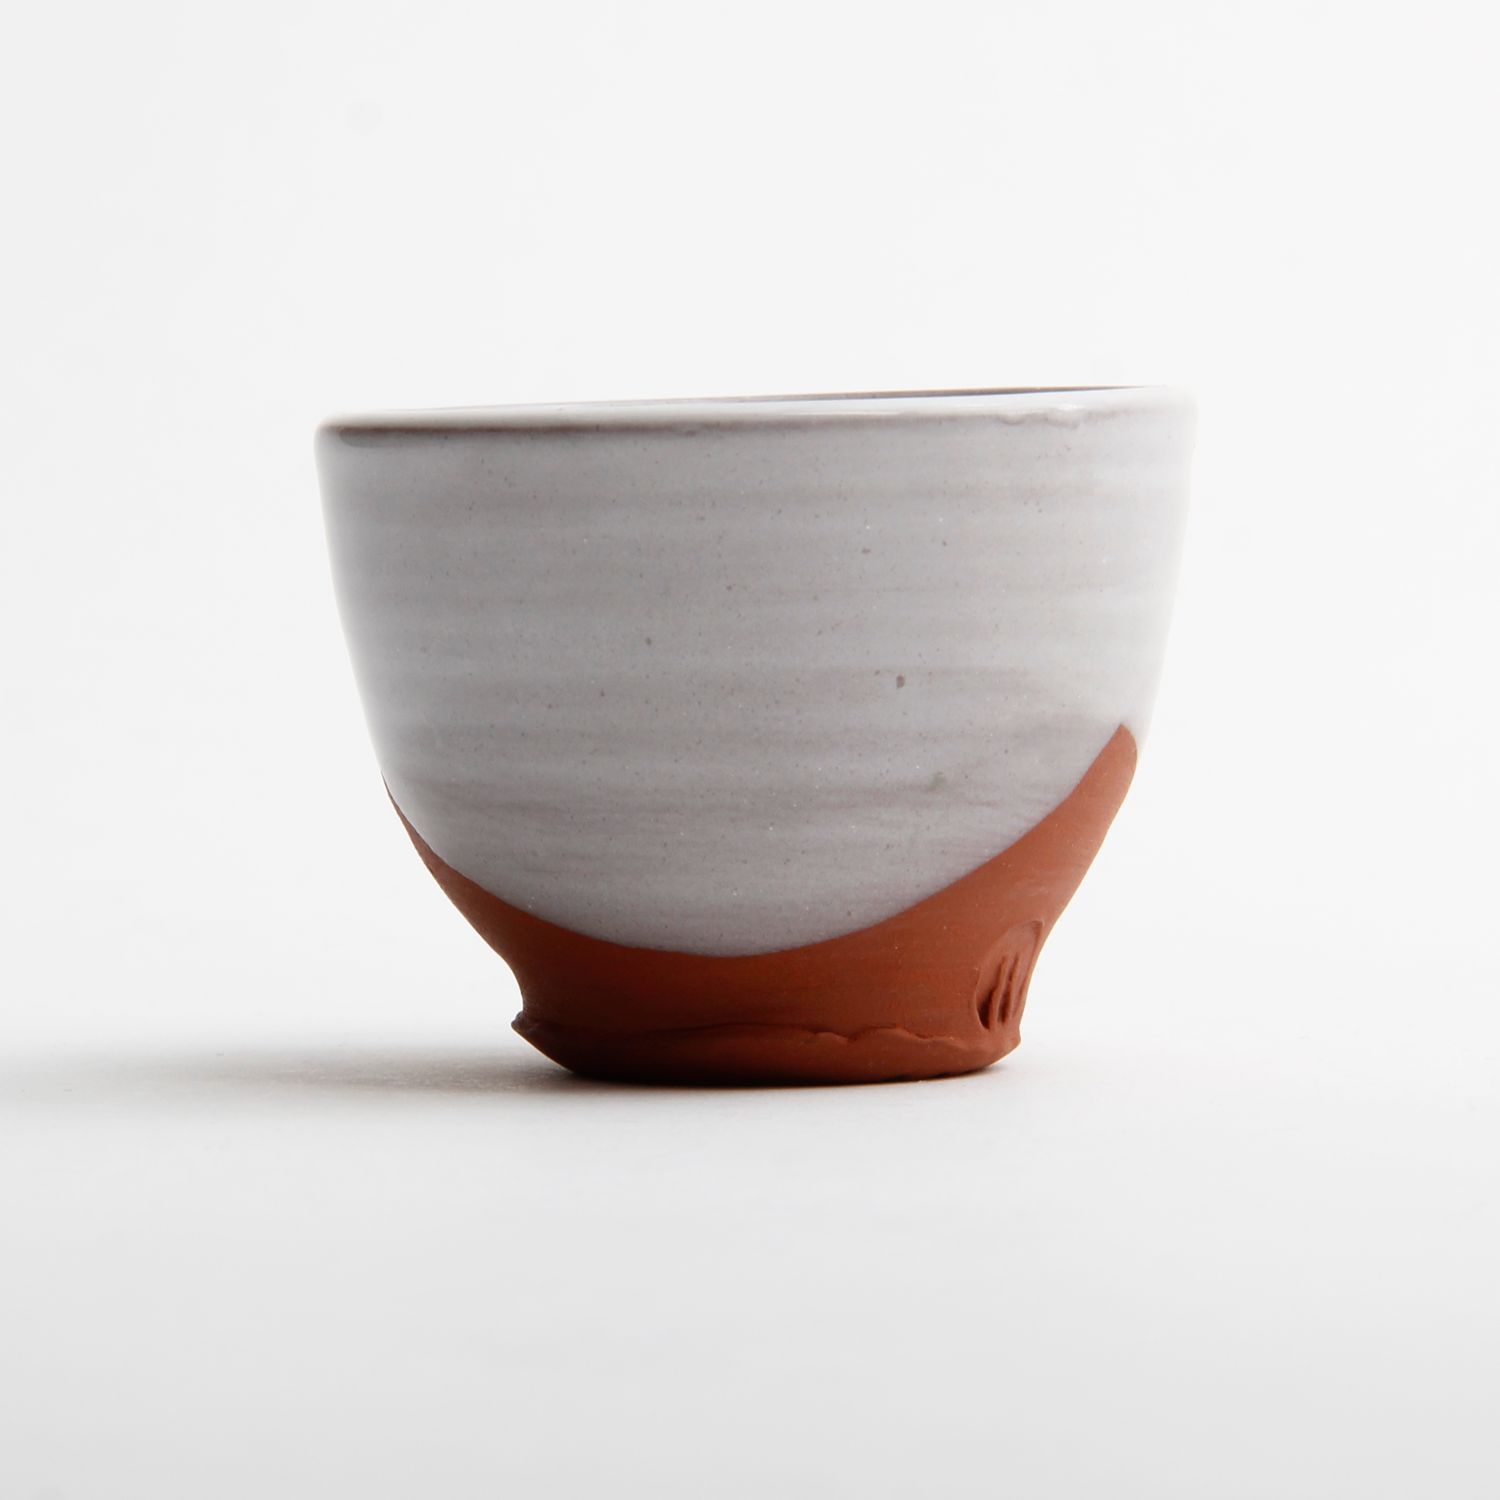 Mary McKenzie: Small Dip Bowl White Product Image 1 of 2